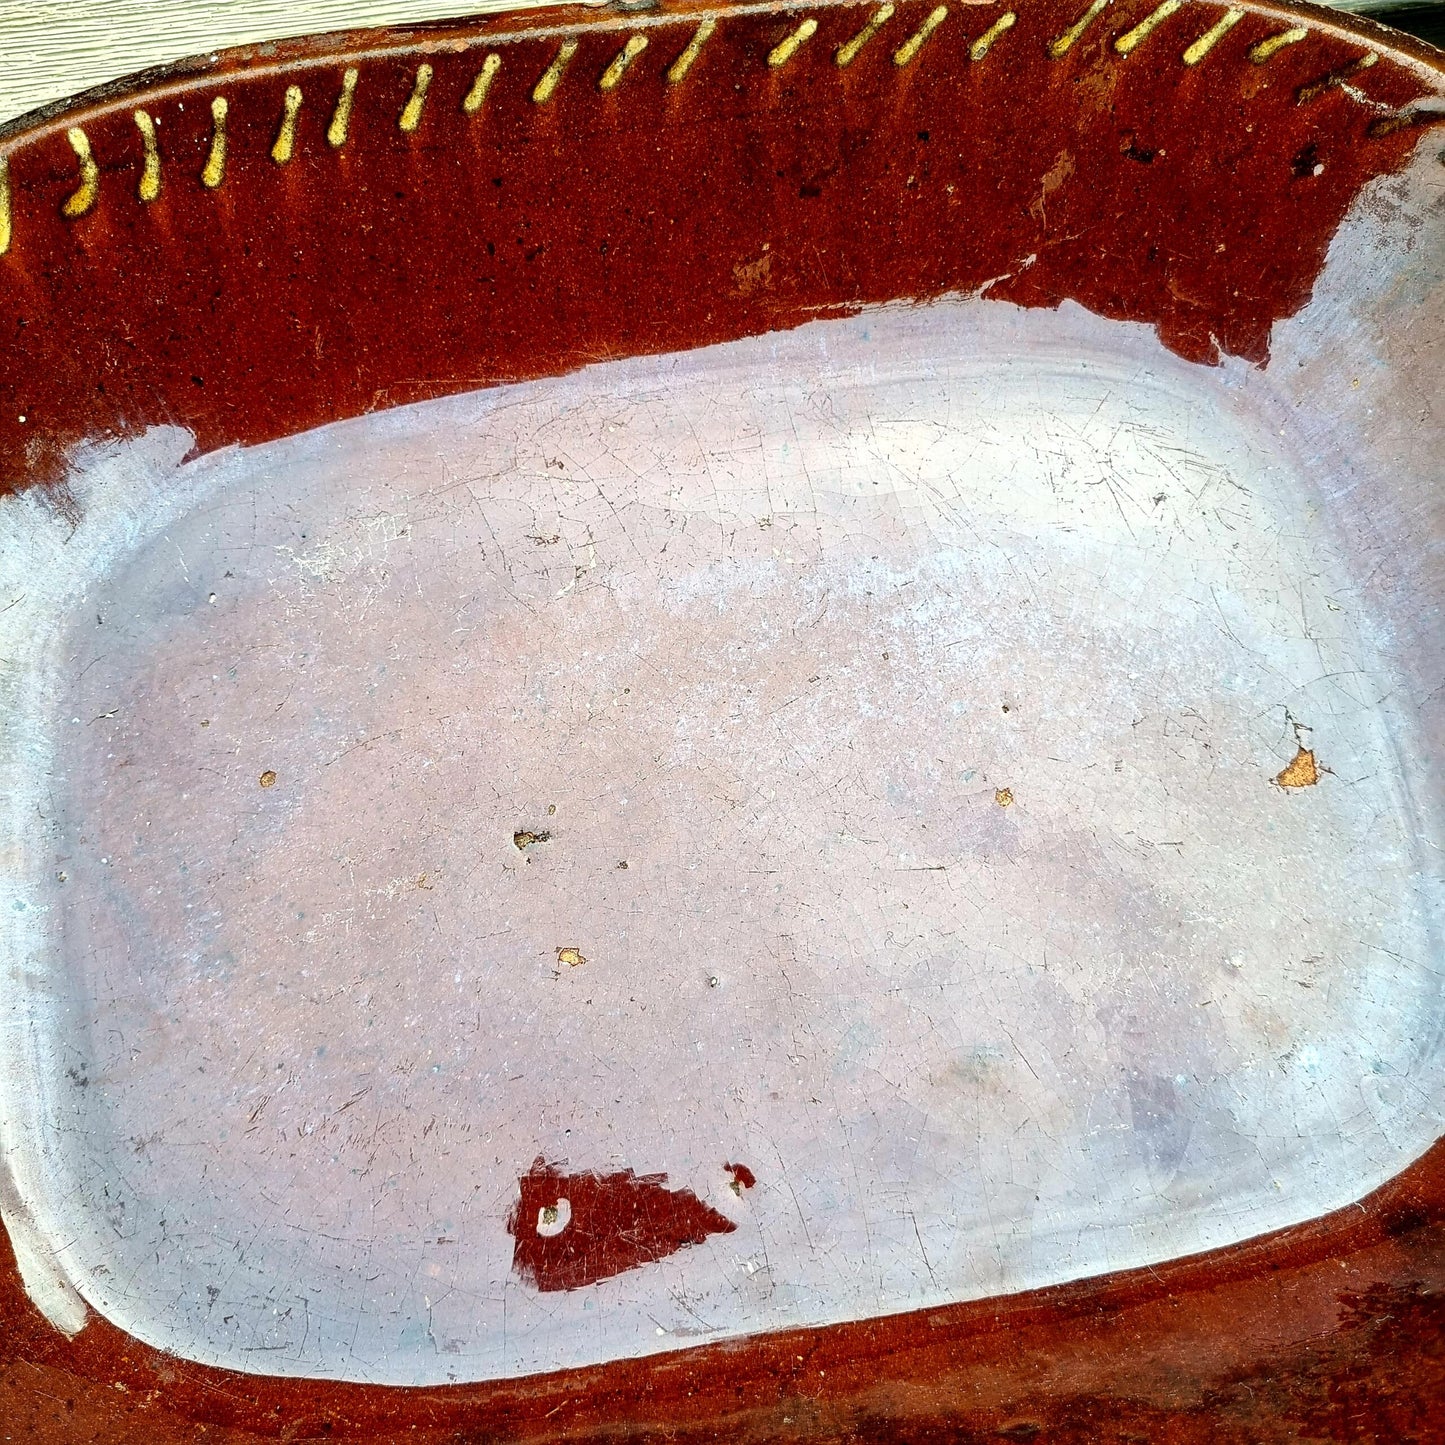 Mid 19th Century Welsh Antique Earthenware Buckley Ware Slip Decorated Baking Dish